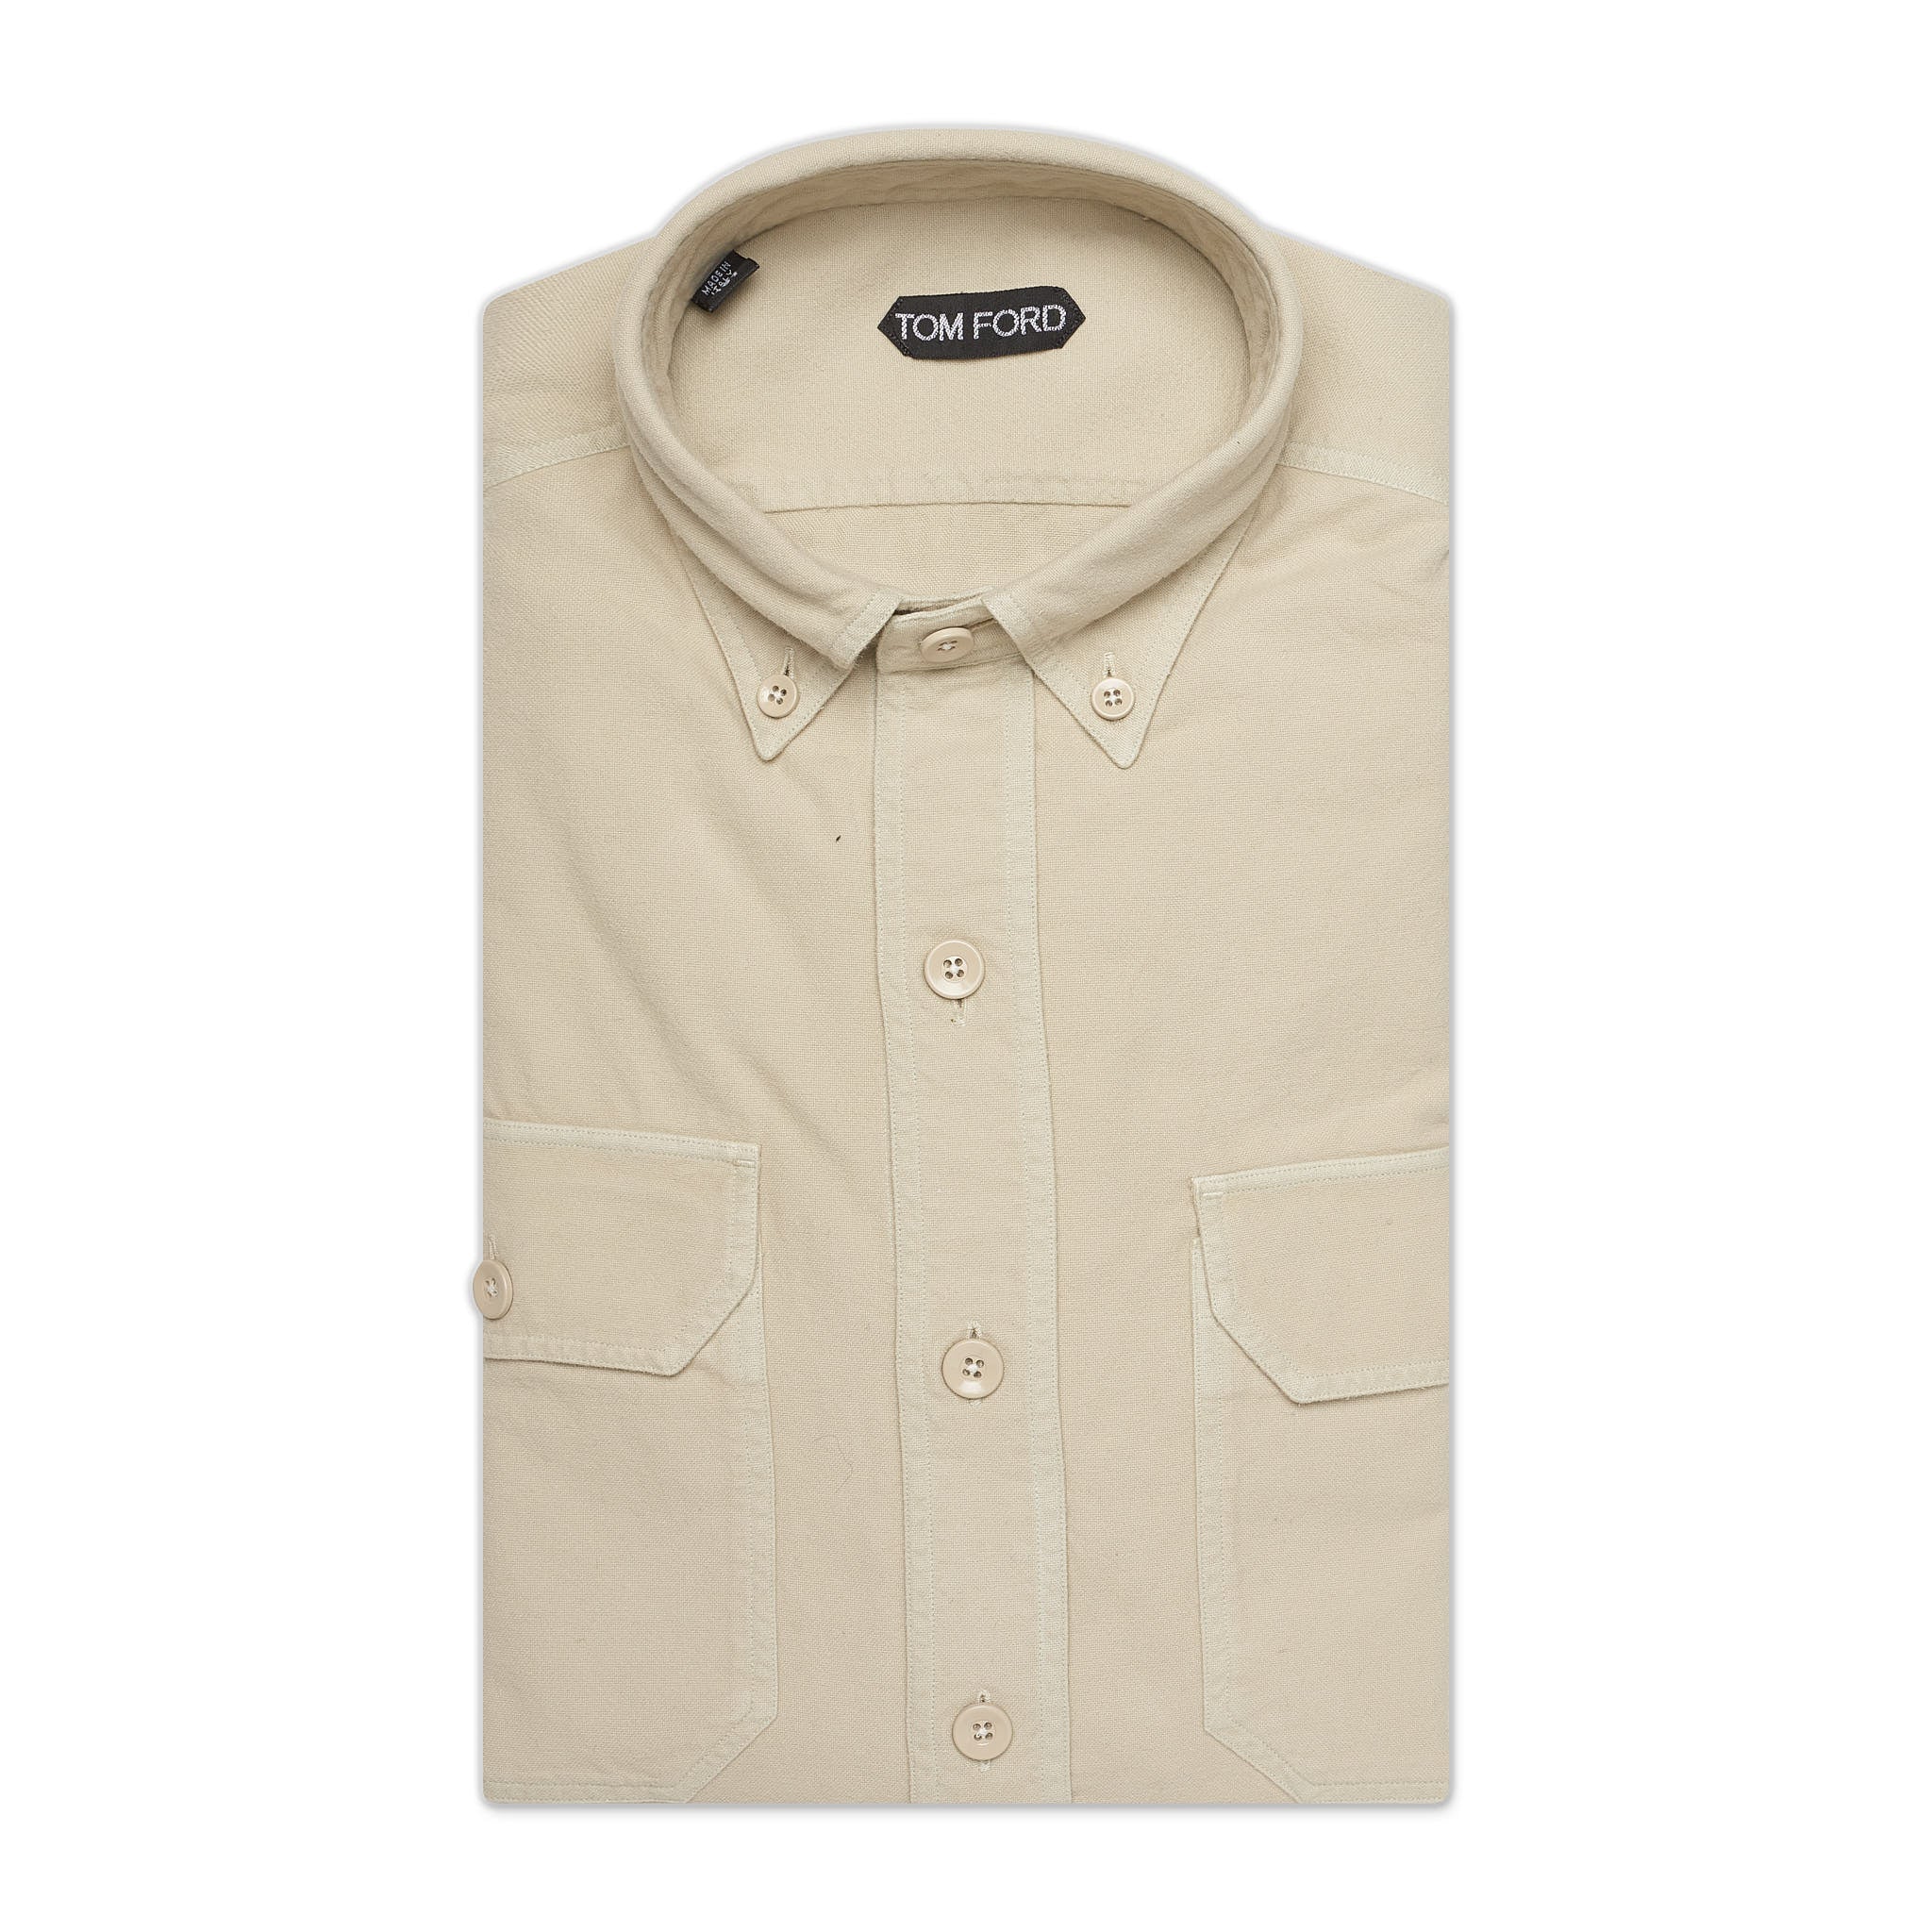 TOM FORD Beige Cotton Button-Down Military Casual Shirt 39 NEW US 15.5 TOM FORD